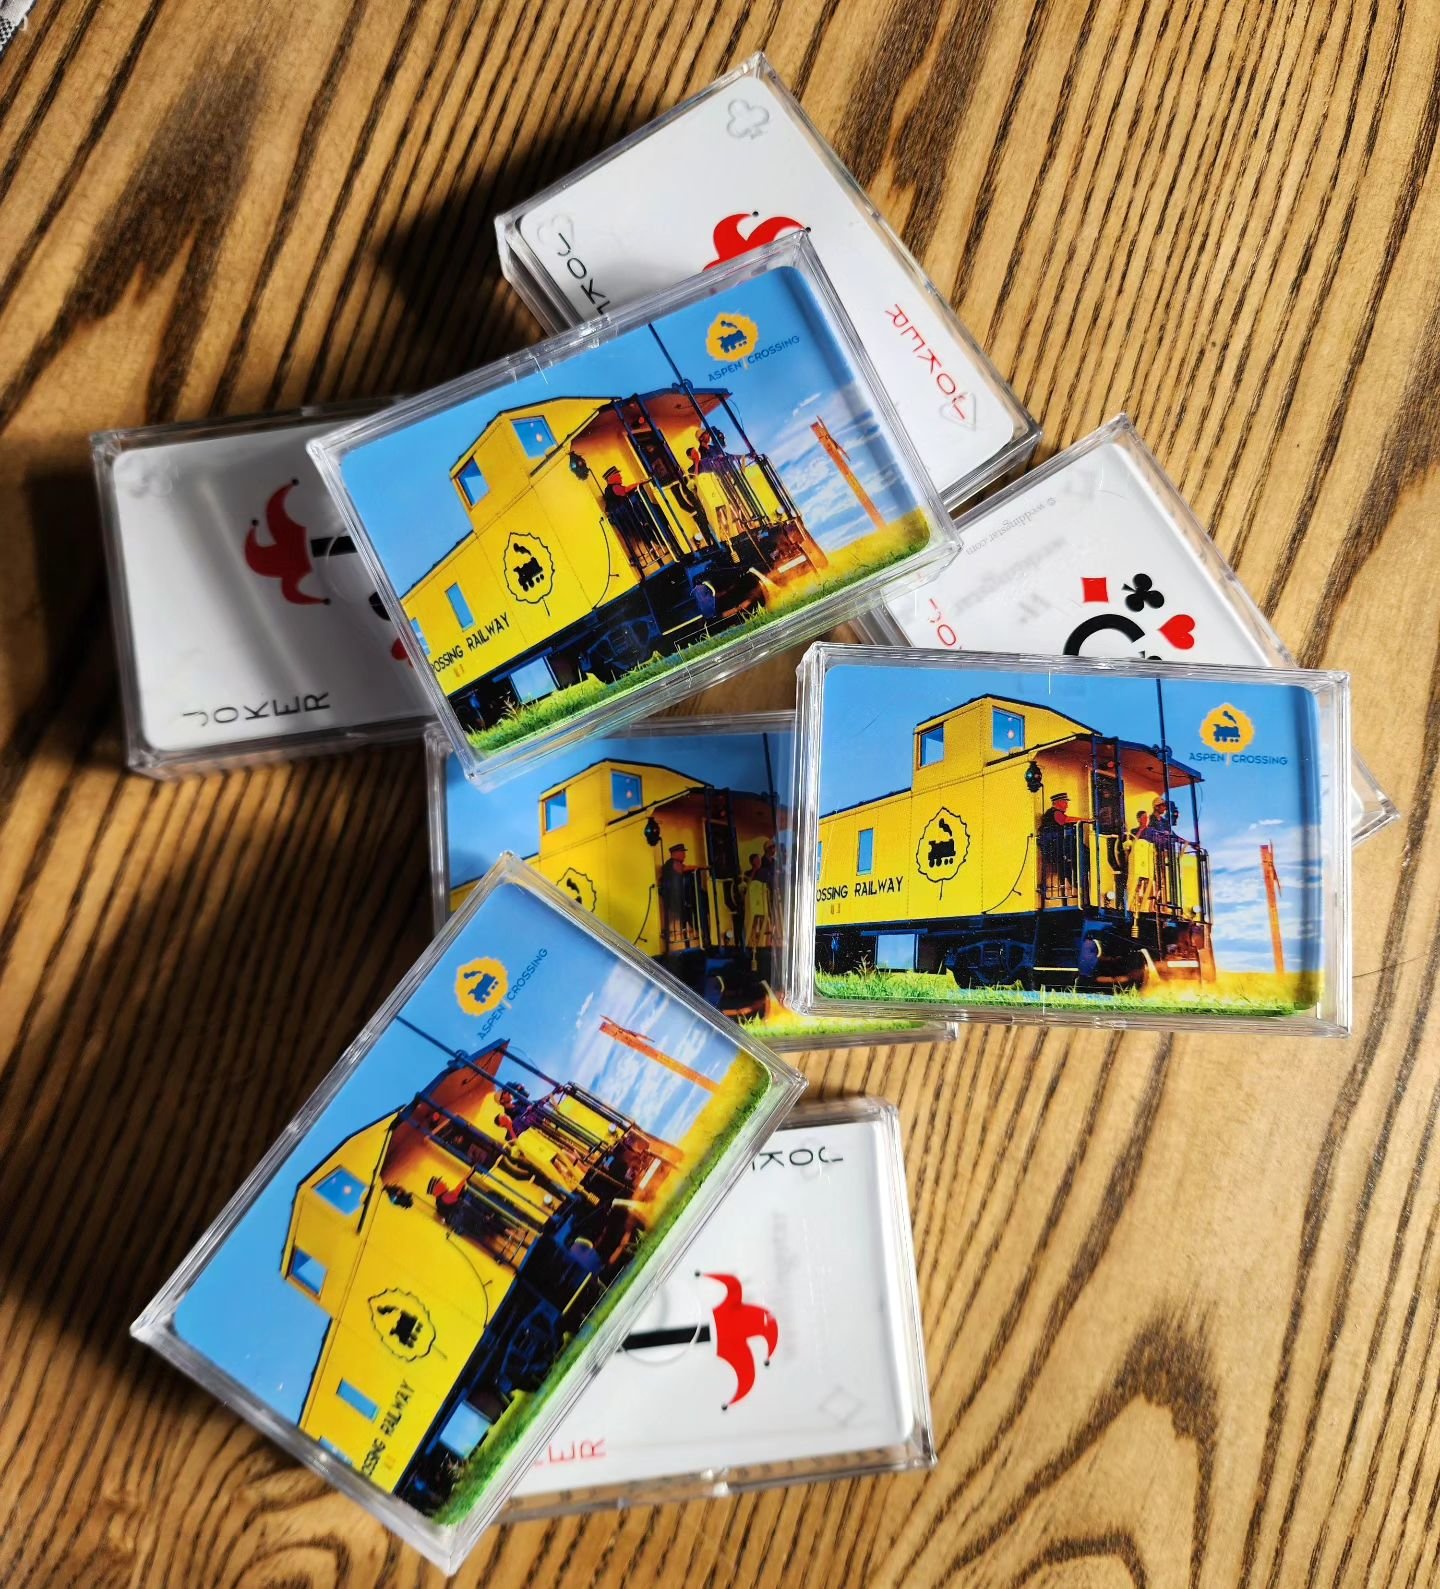 Thrilled to reveal our latest creation: playing cards designed exclusively for @aspencrossing a place that's captured our hearts year after year. 🚂
 
It's an honor to craft something for a destination that means so much to us. Can't wait to see them